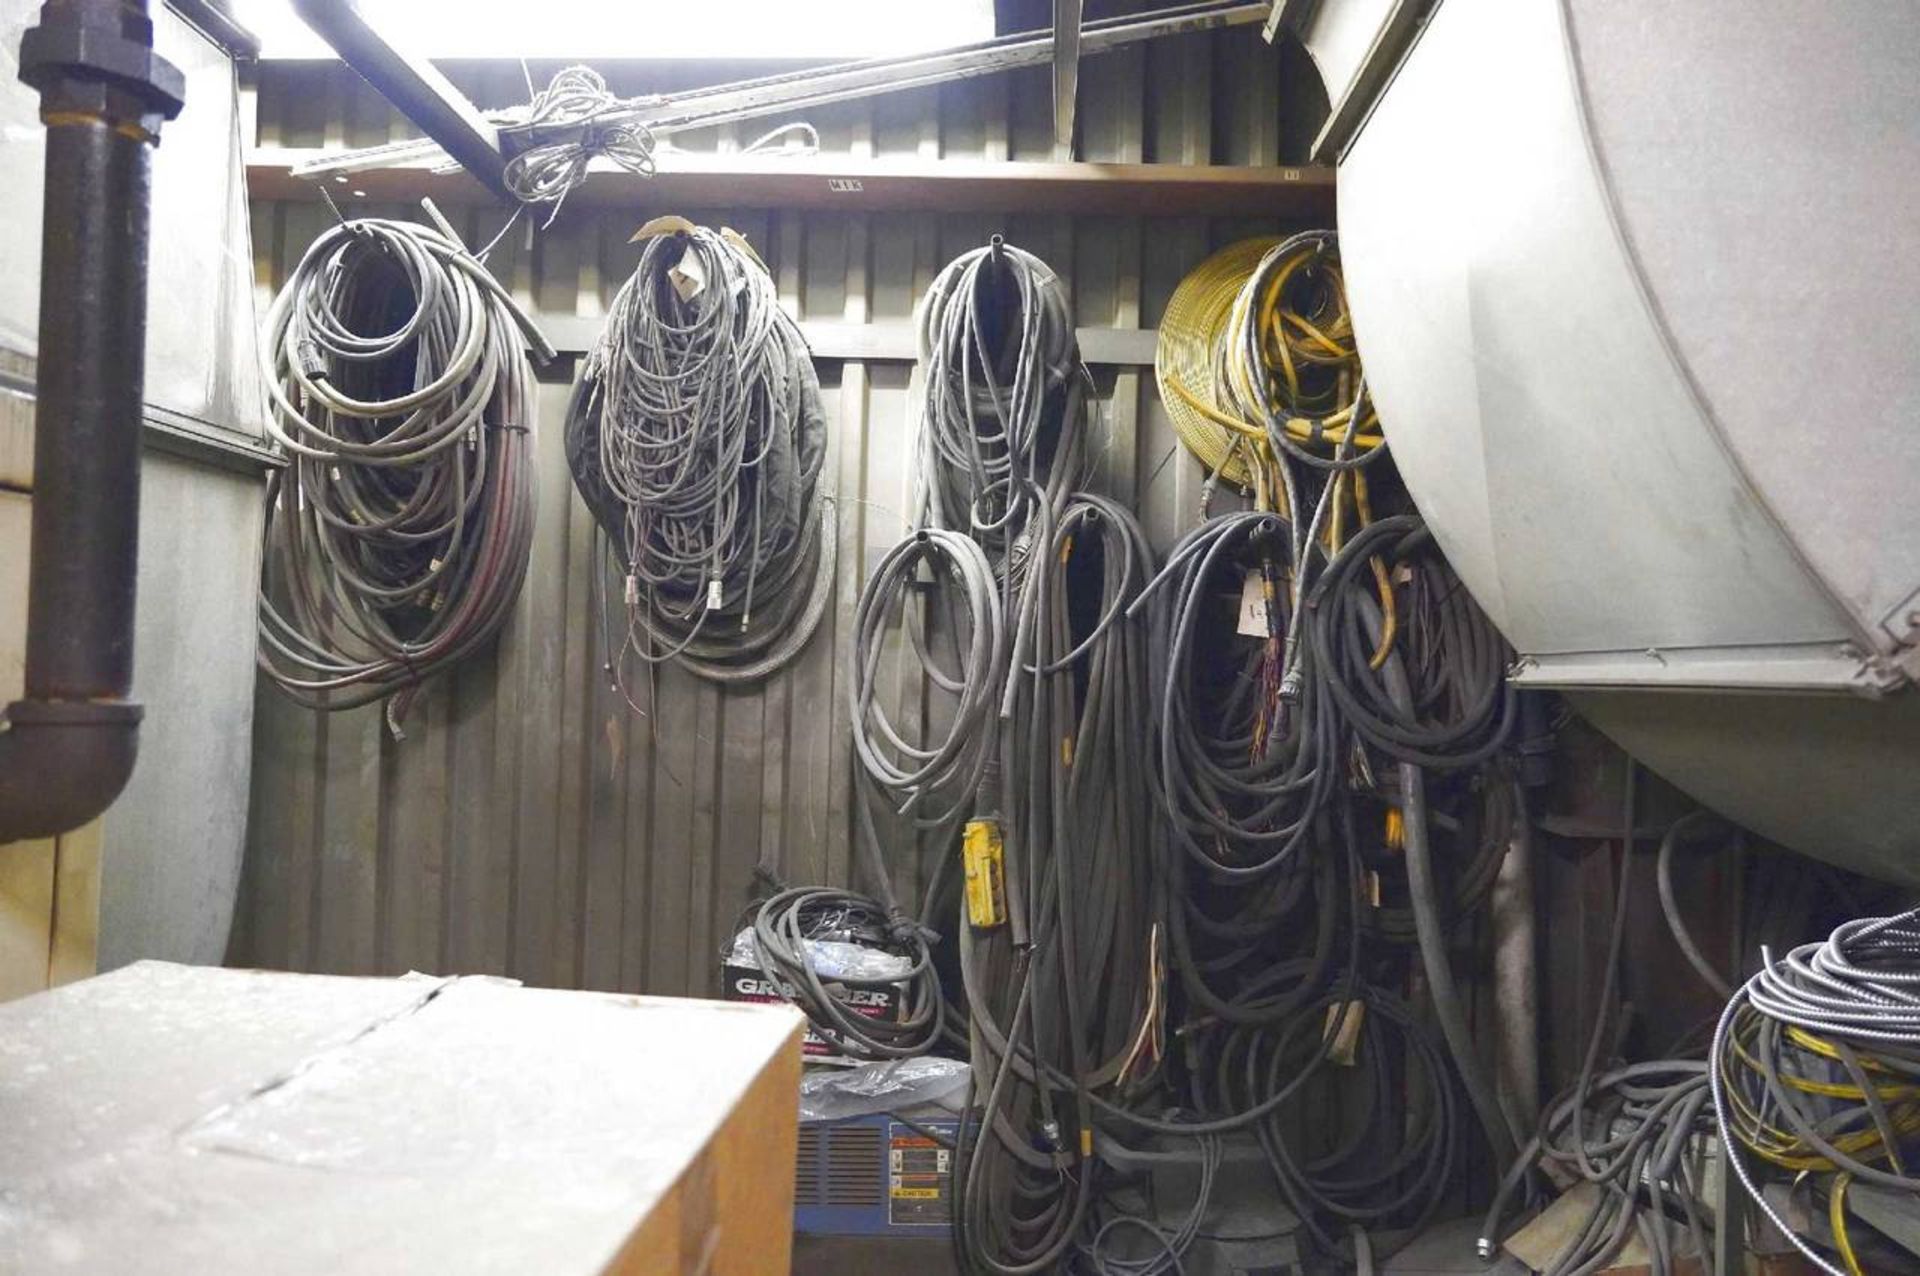 Contents of Compressor Room - Image 6 of 16